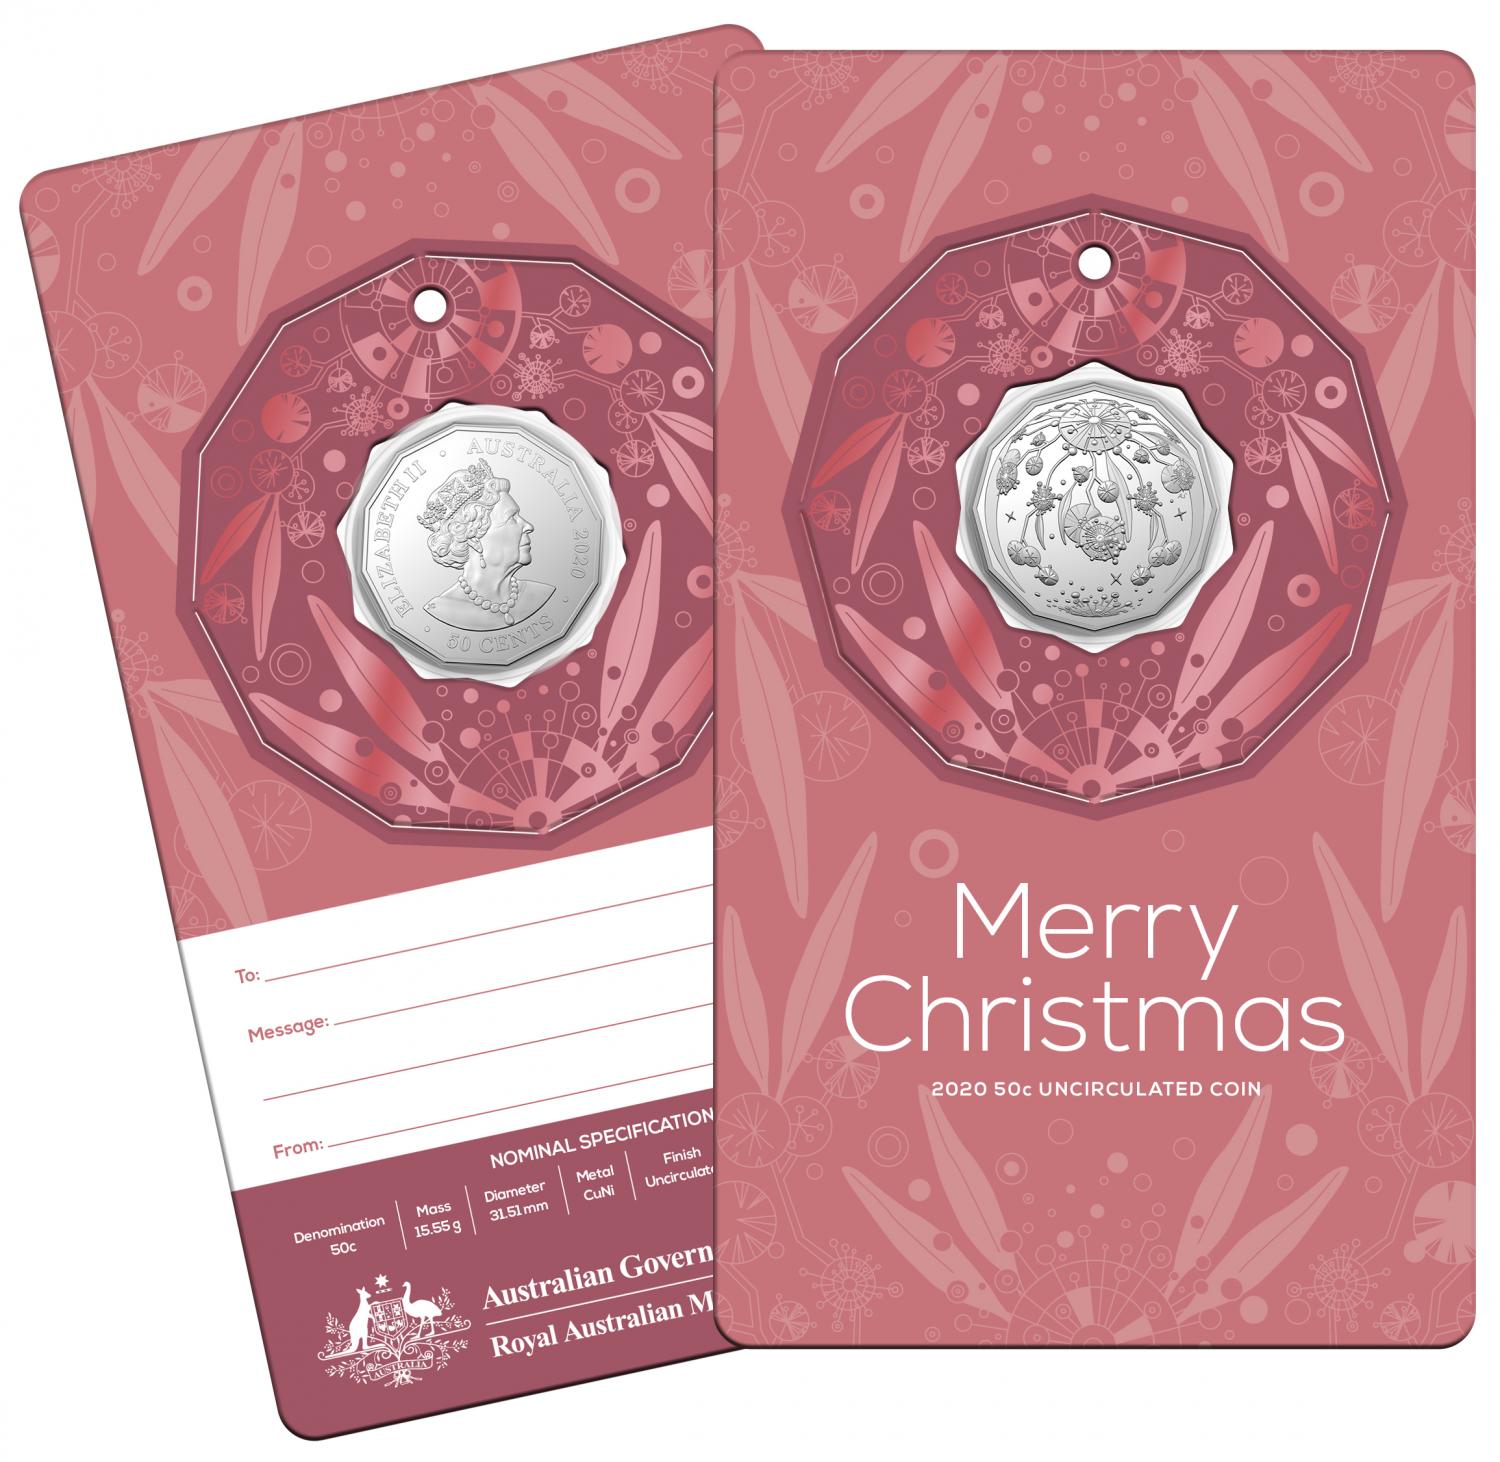 Thumbnail for 2020 Christmas .50c UNC Coin - Red Card Decoration